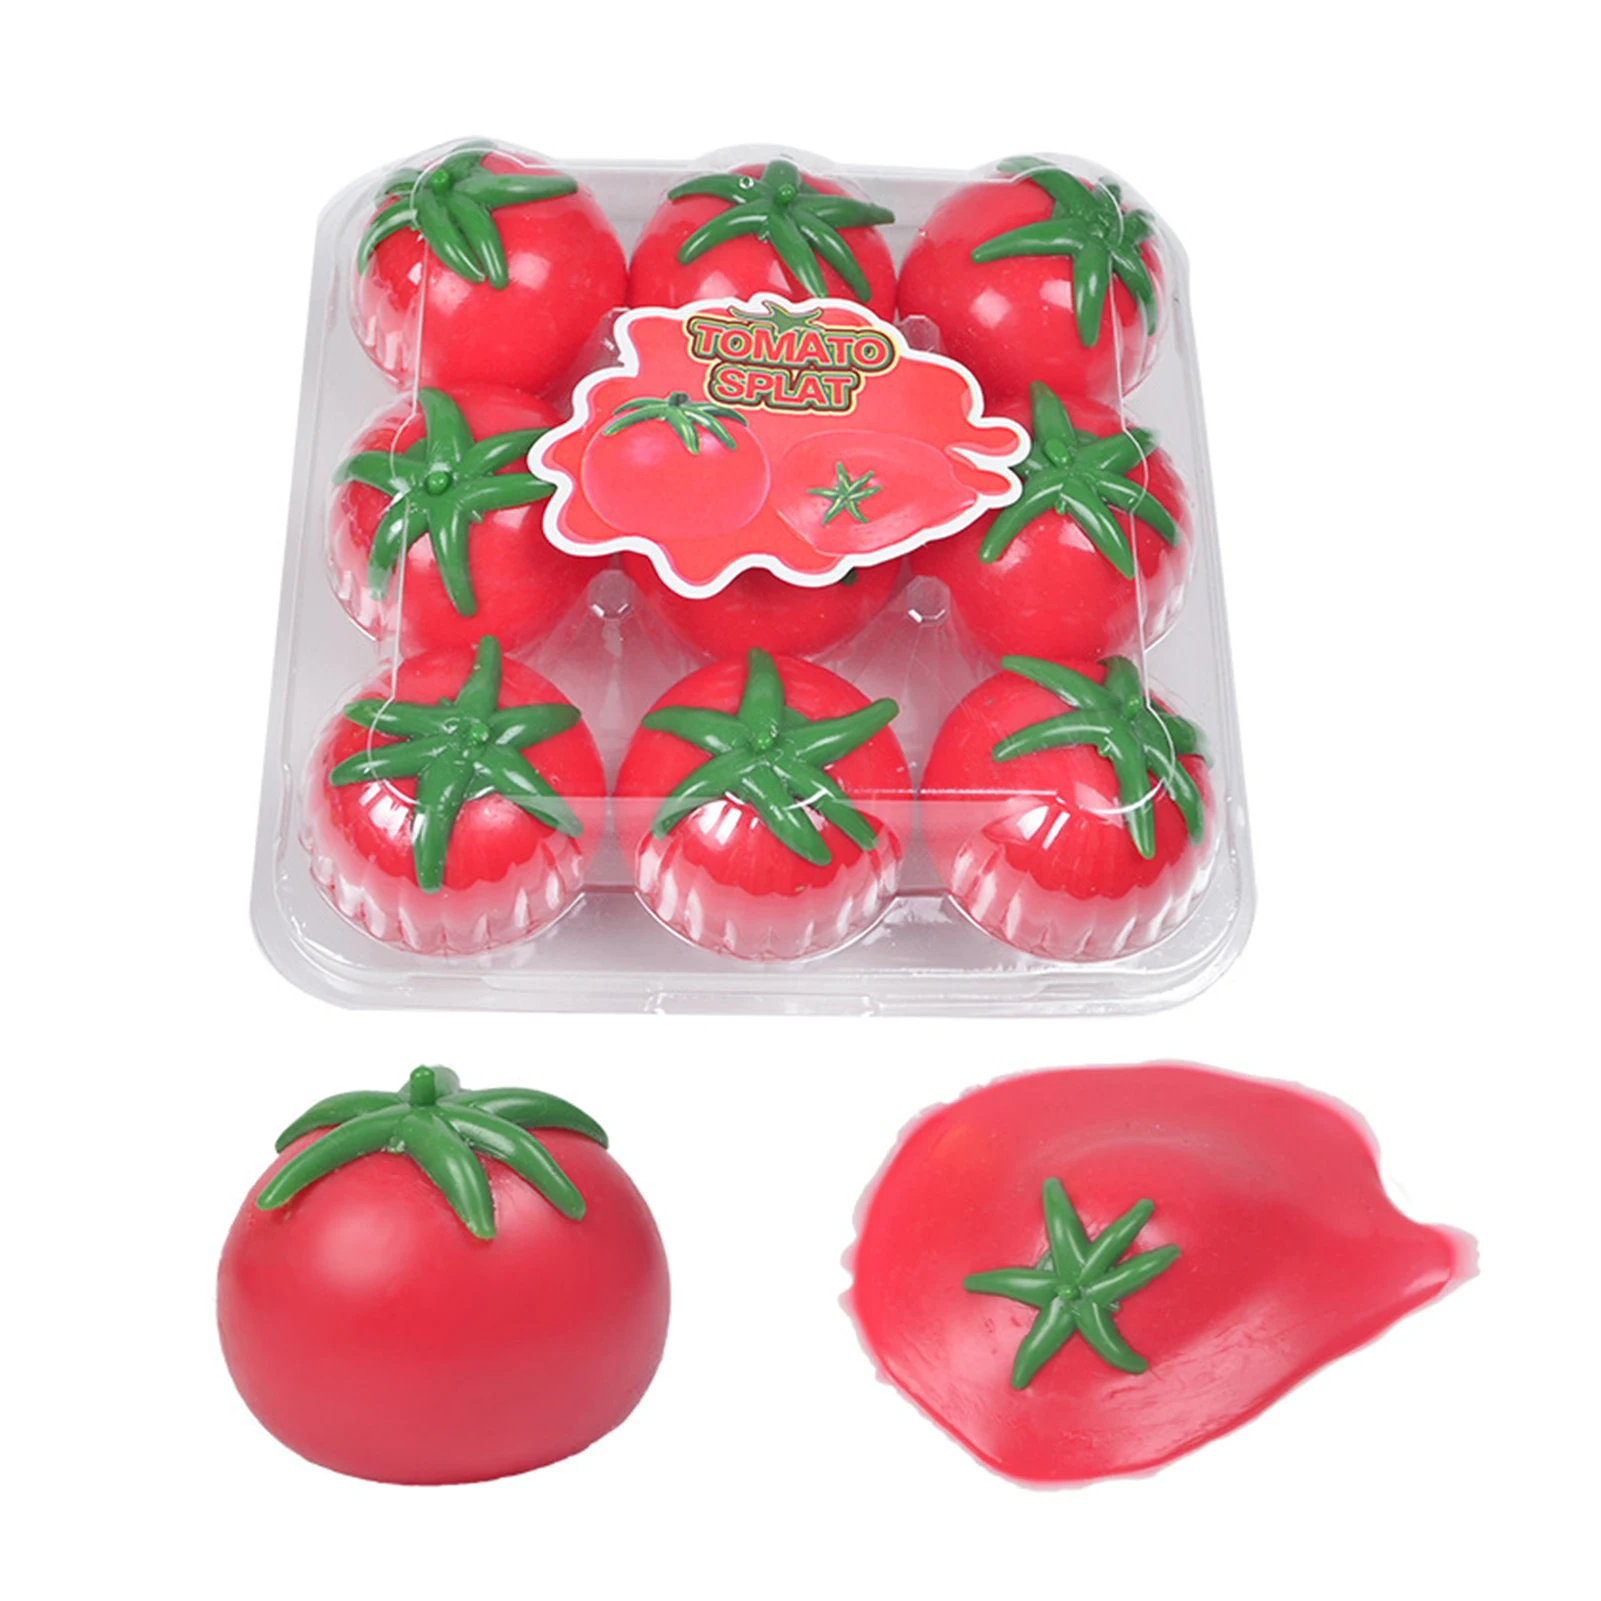 Enlarge 9Pcs Tomato Squishies Balls Kids Toys Antistress Prank Props Water Ball Autism Squeeze Stress Relief Fidget Toy Kids Gift